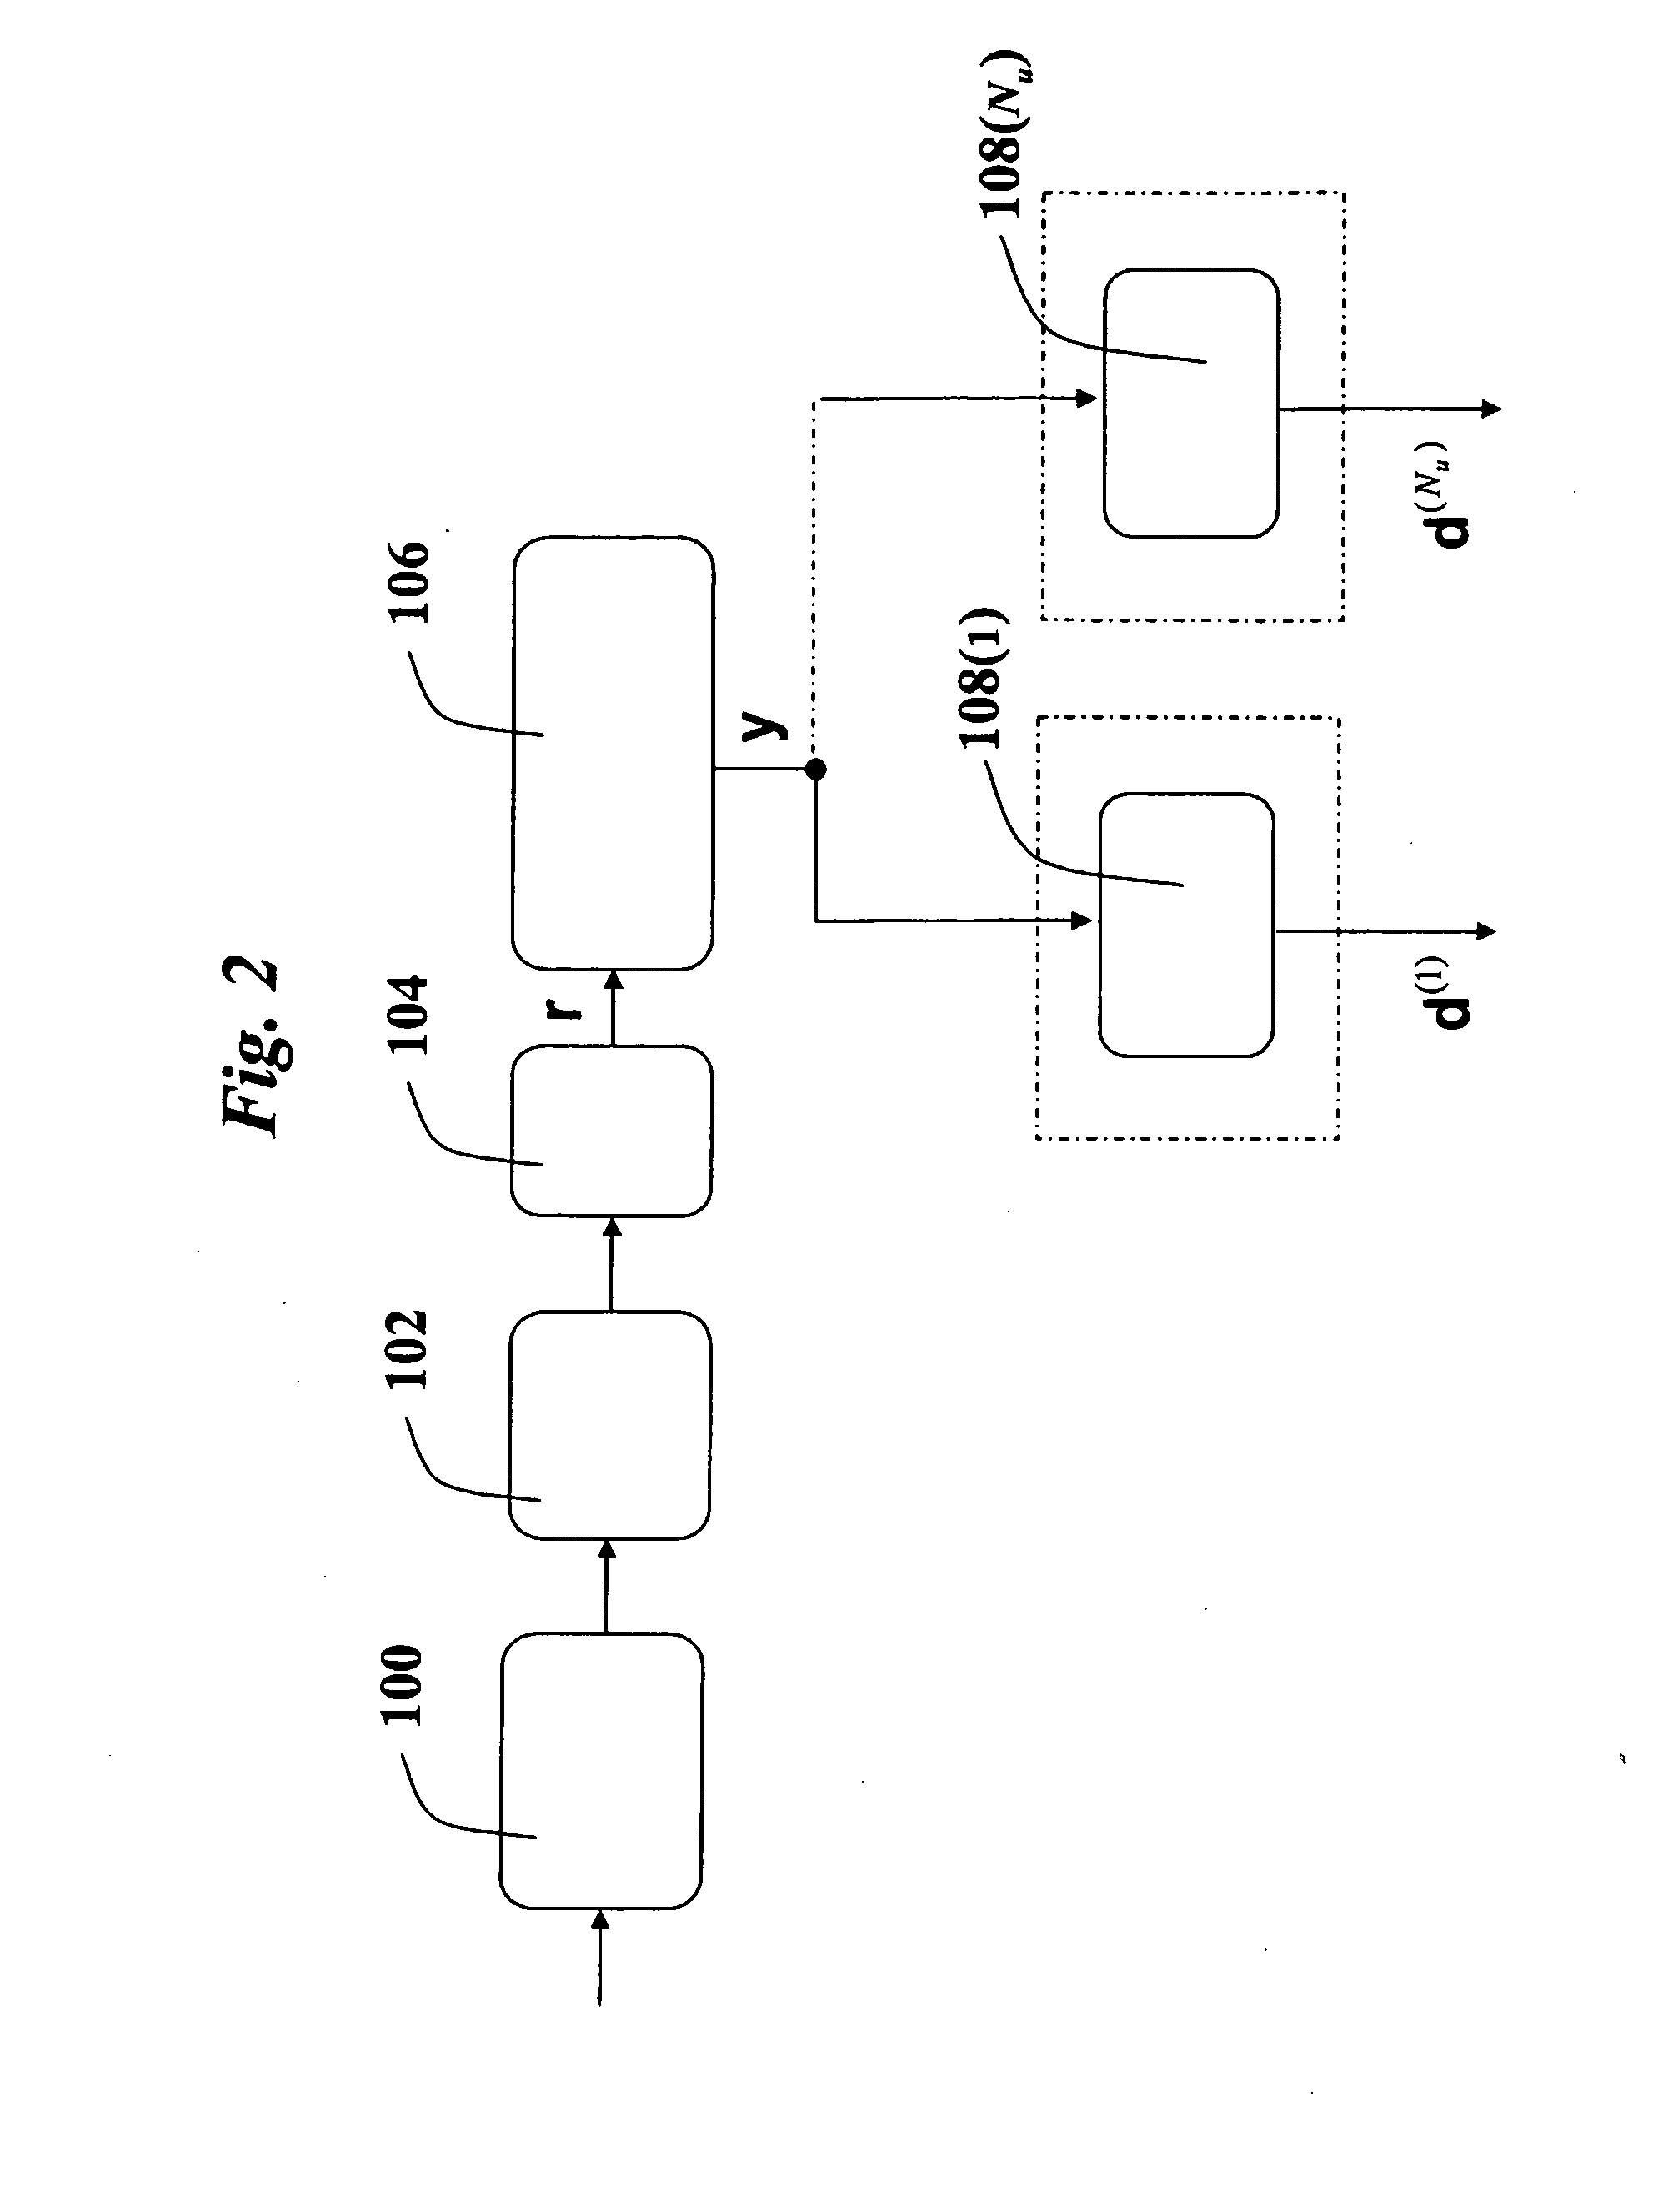 Frequency Domain Channel Estimation in a Single Carrier Frequency Division Multiple Acess System